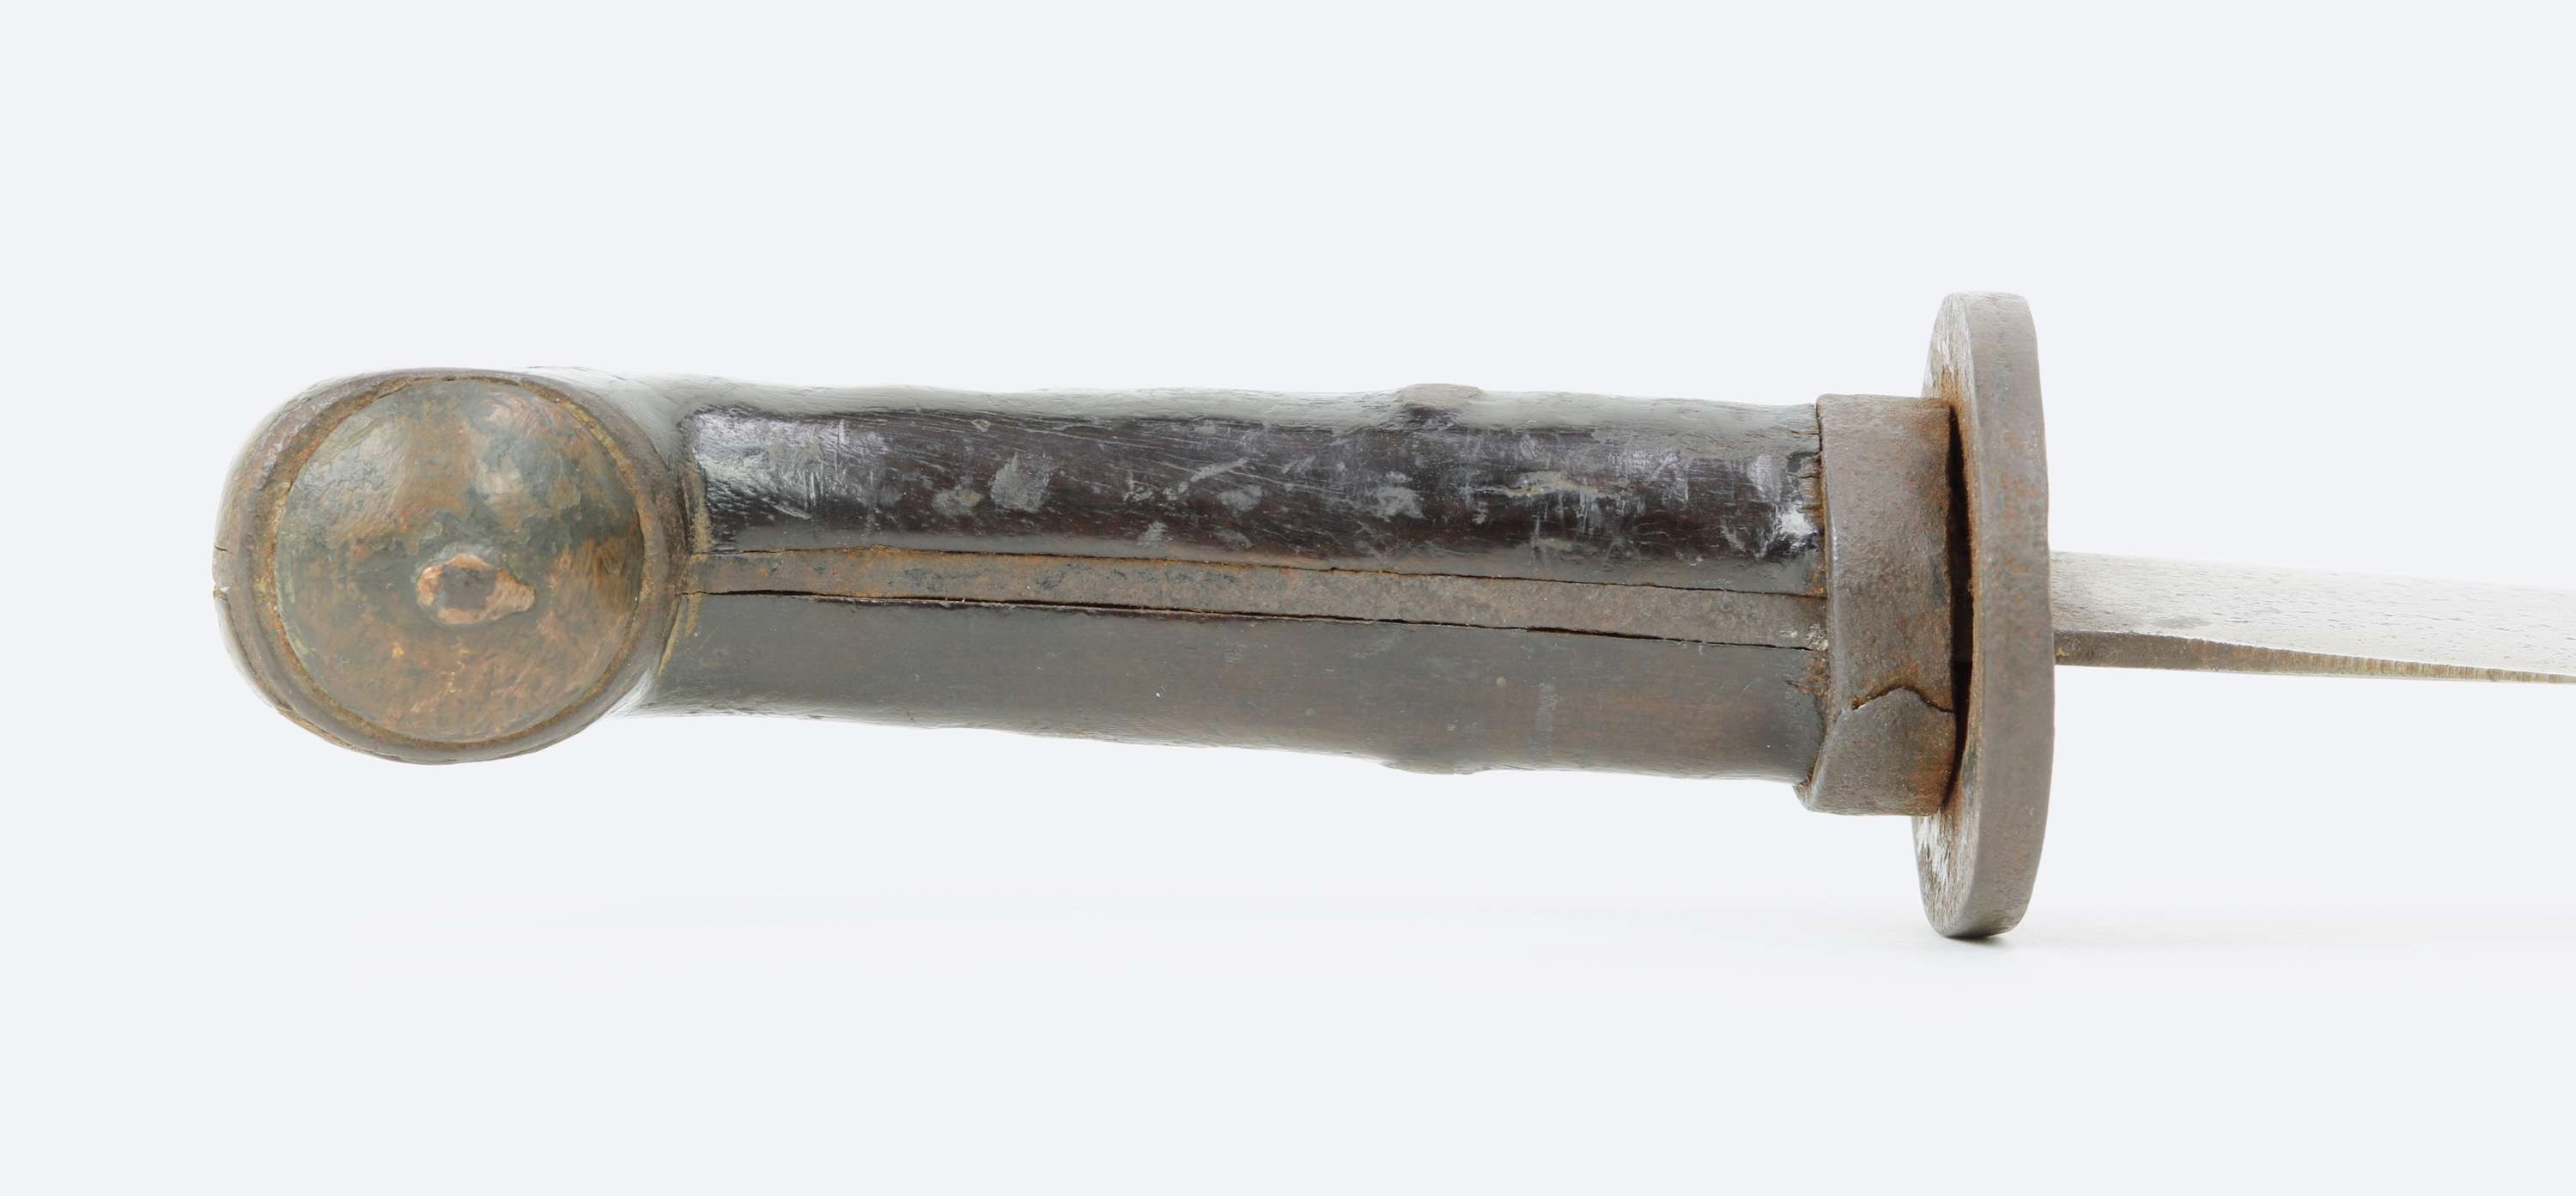 Early Chinese duǎndāo with curved grip